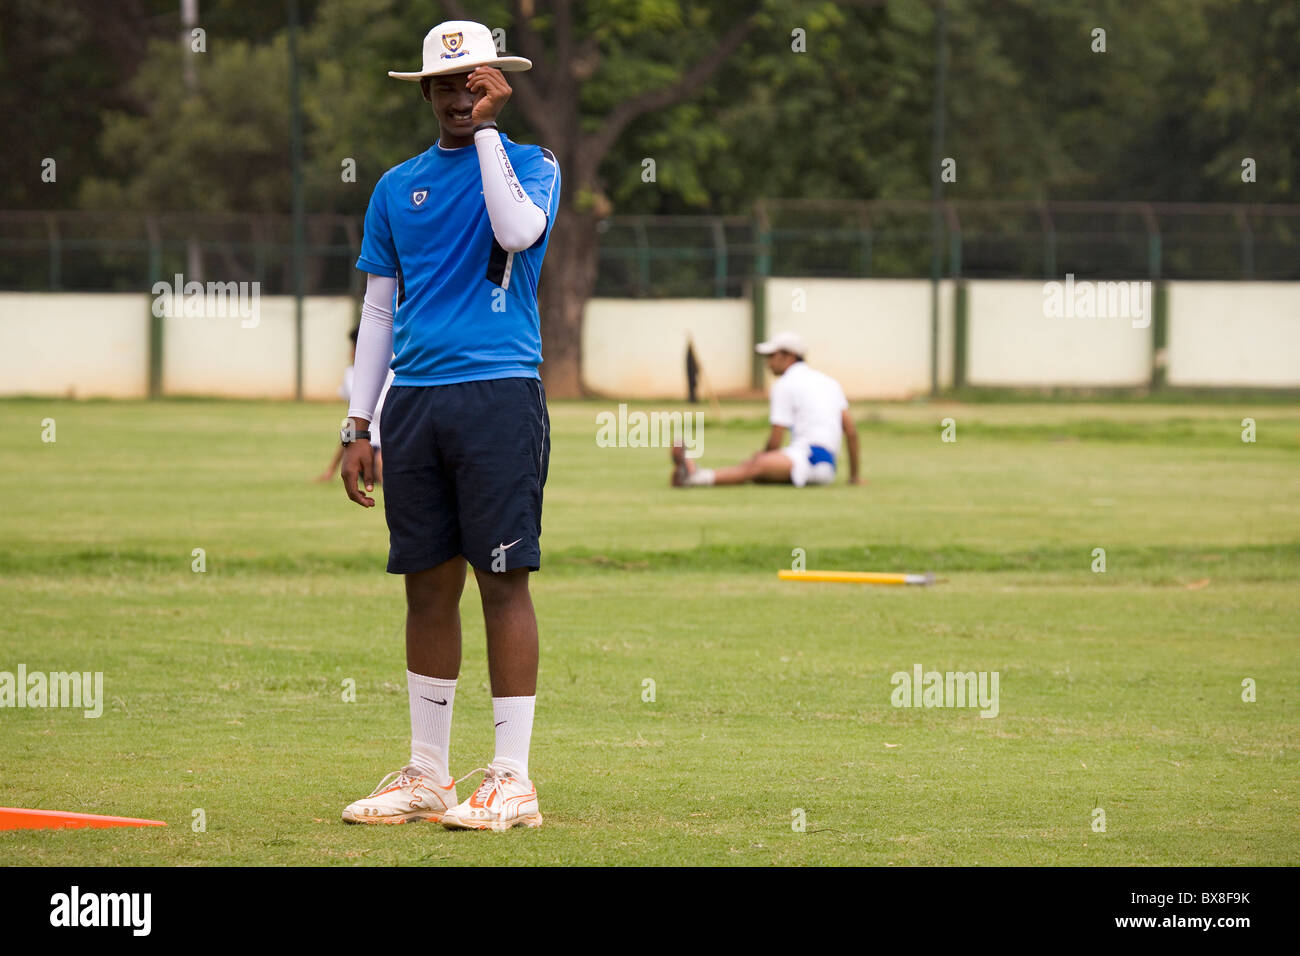 Talented Indian cricketers train at the National Cricket Academy in Bengaluru, India. Stock Photo